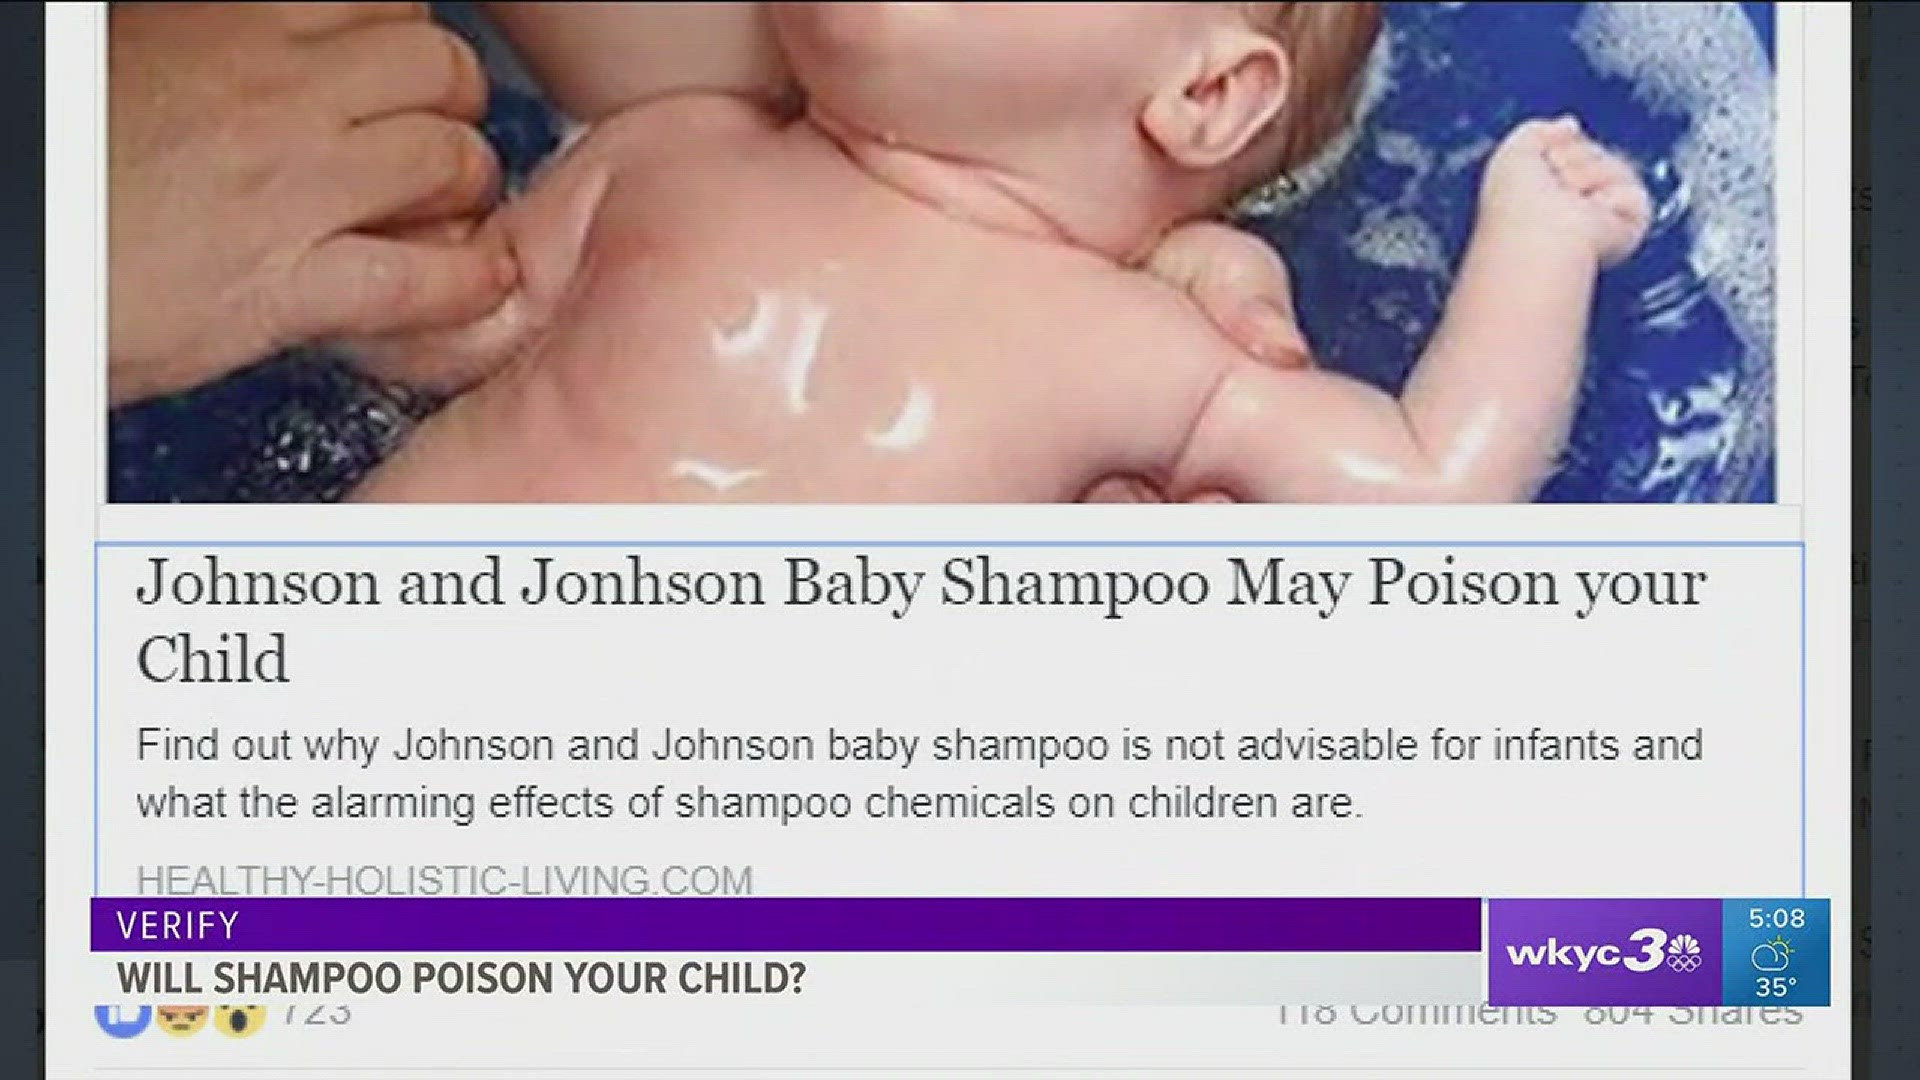 VERIFY, Are there toxins in Johnson's baby shampoo?